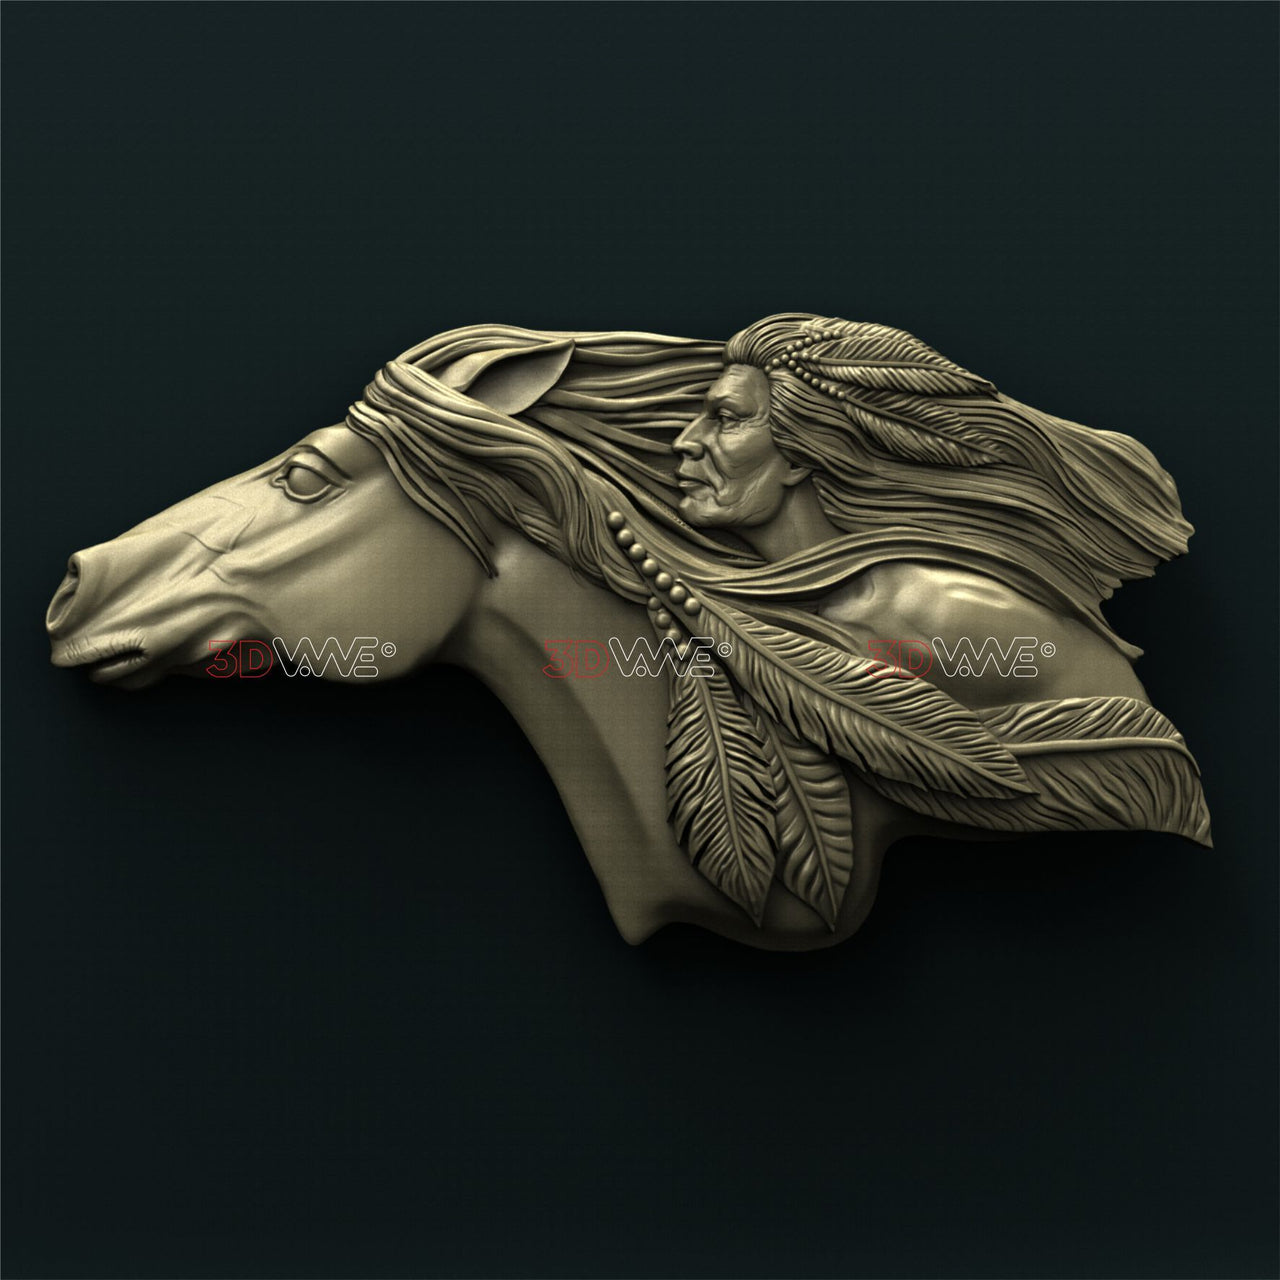 AMERICAN NATIVE AND HORSE 3D STL 3DWave